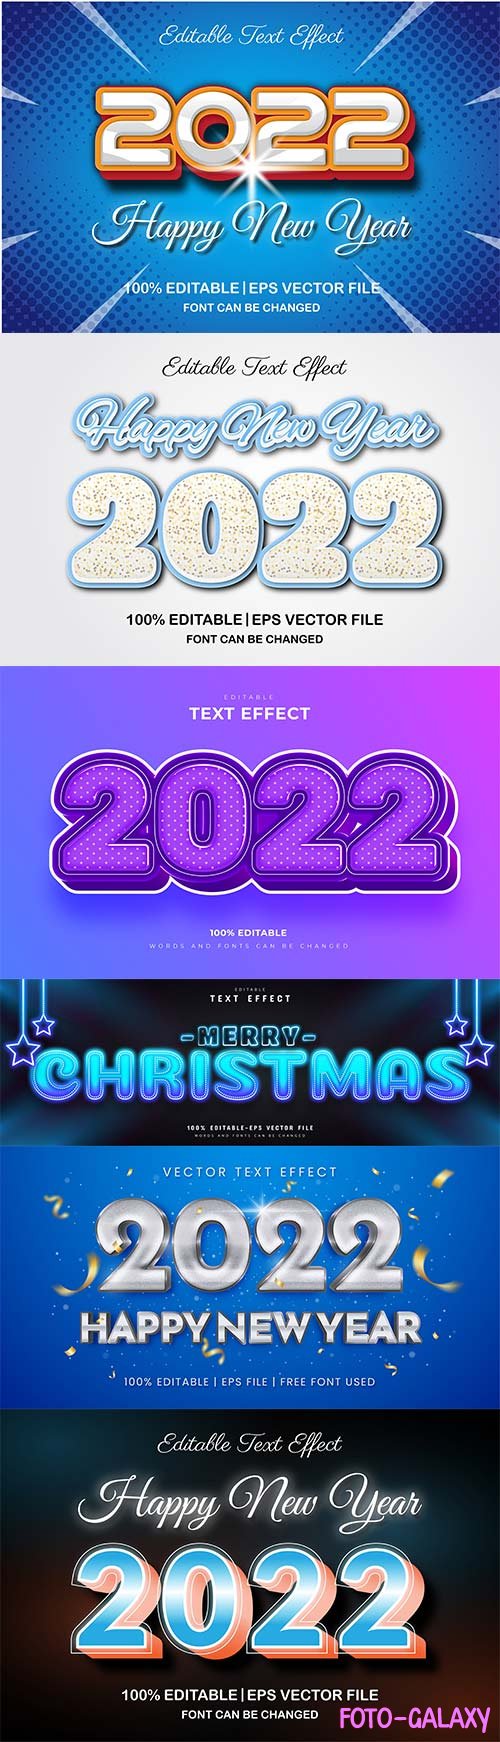 Merry christmas and happy new year 2022 editable vector text effects vol 15